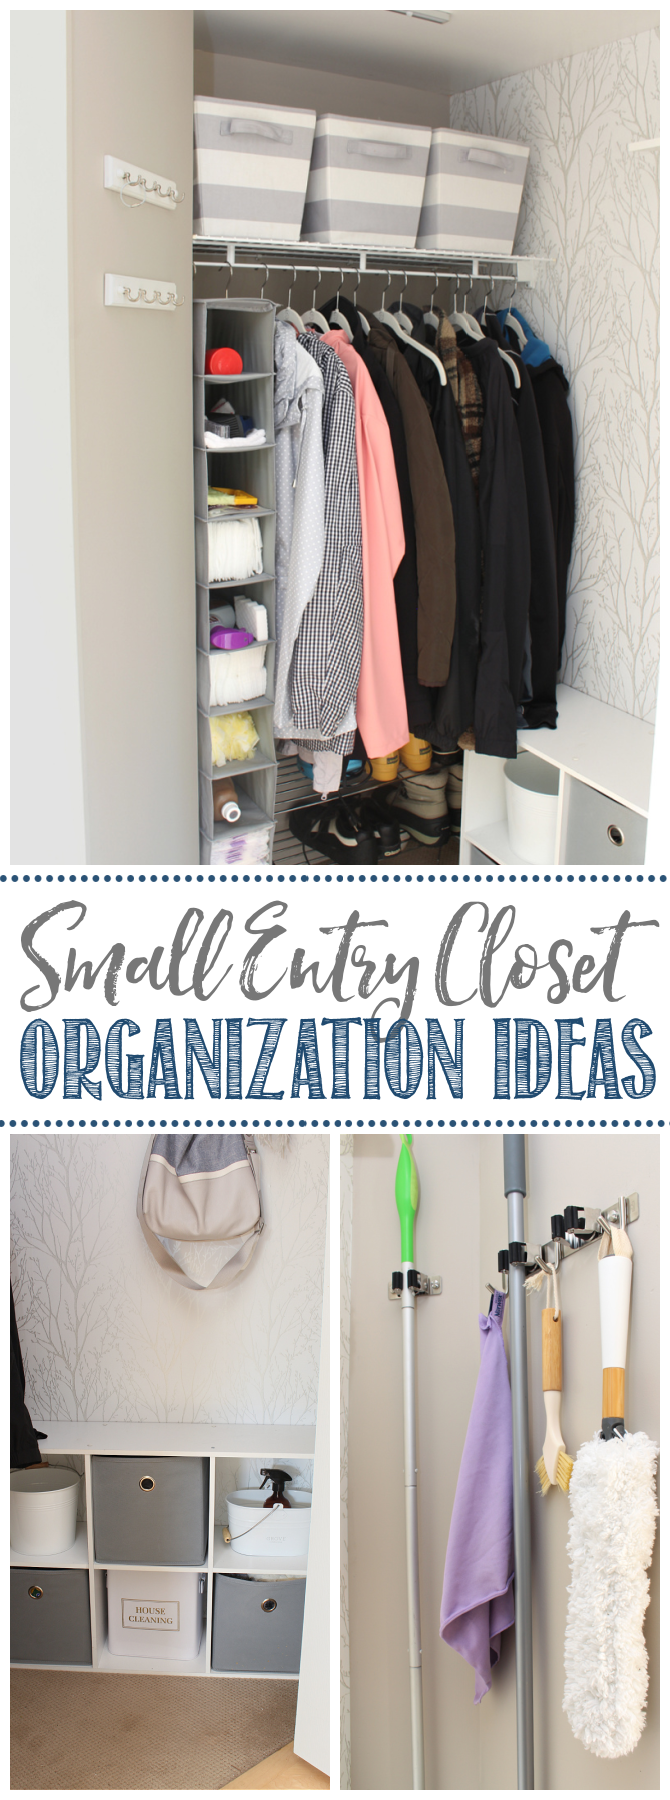 https://www.cleanandscentsible.com/wp-content/uploads/2021/04/Small-Entry-Closet-Organization-Ideas.png